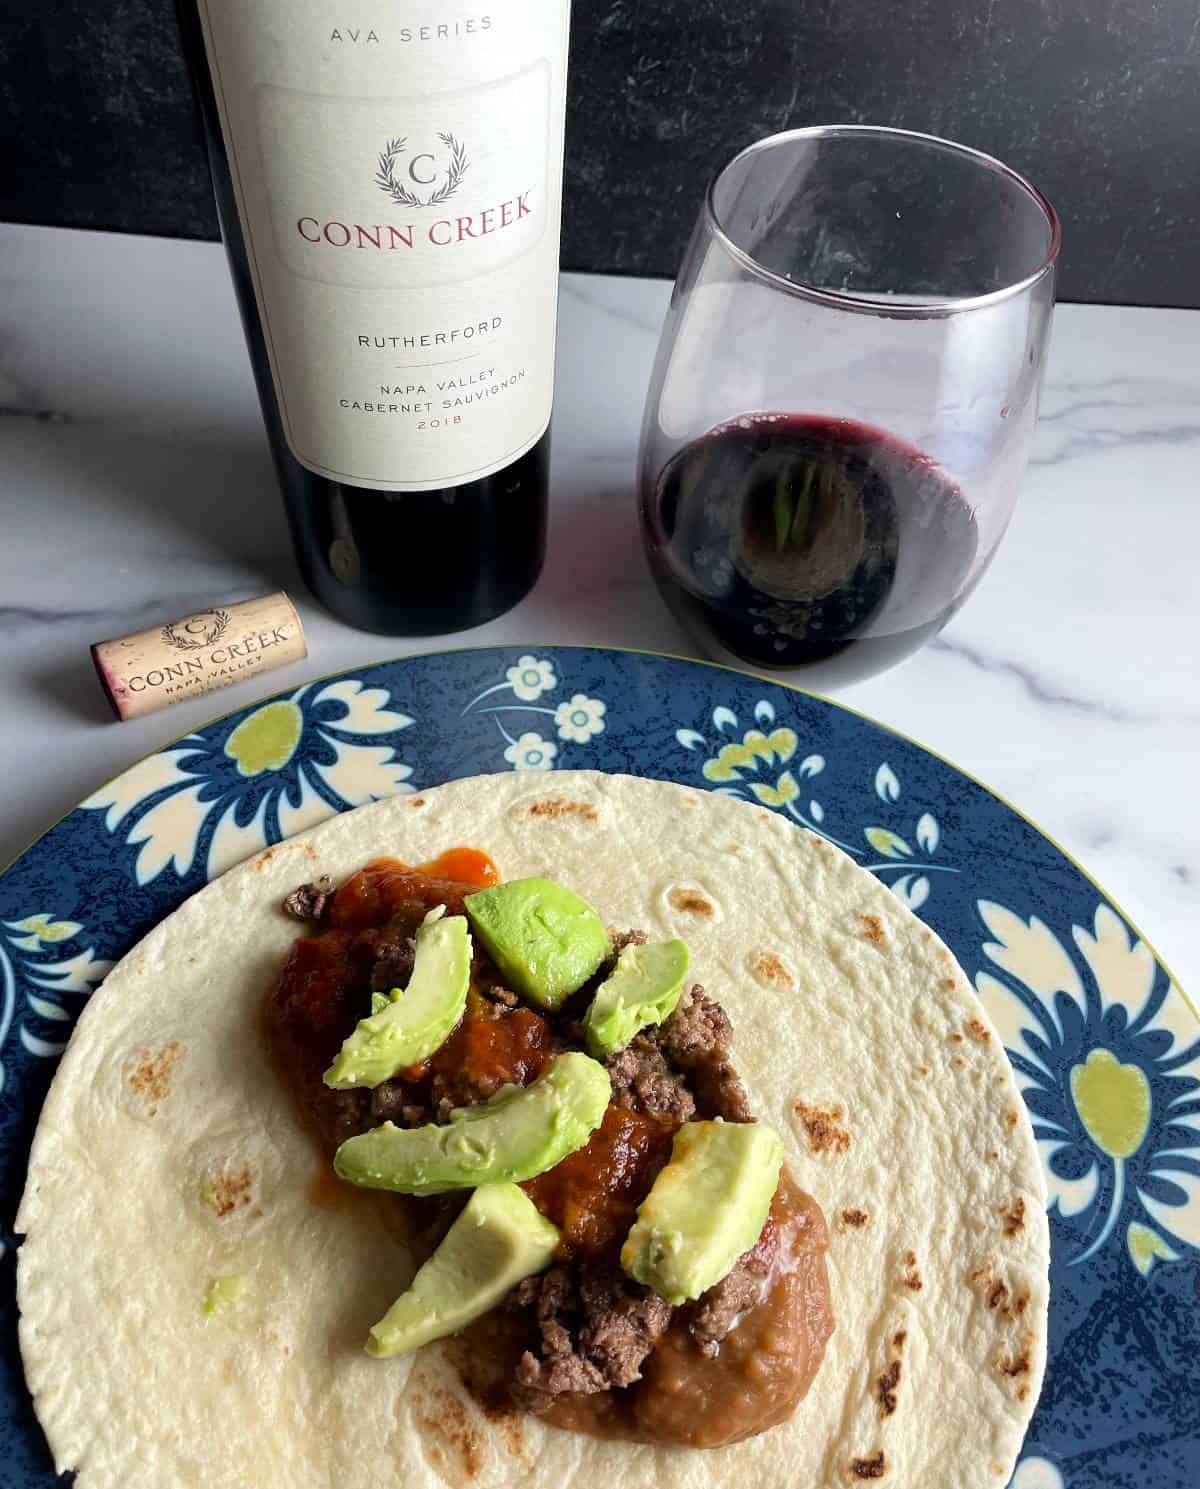 a beef and bean soft taco, topped with avocados, and served with a Cabernet Sauvignon red wine.